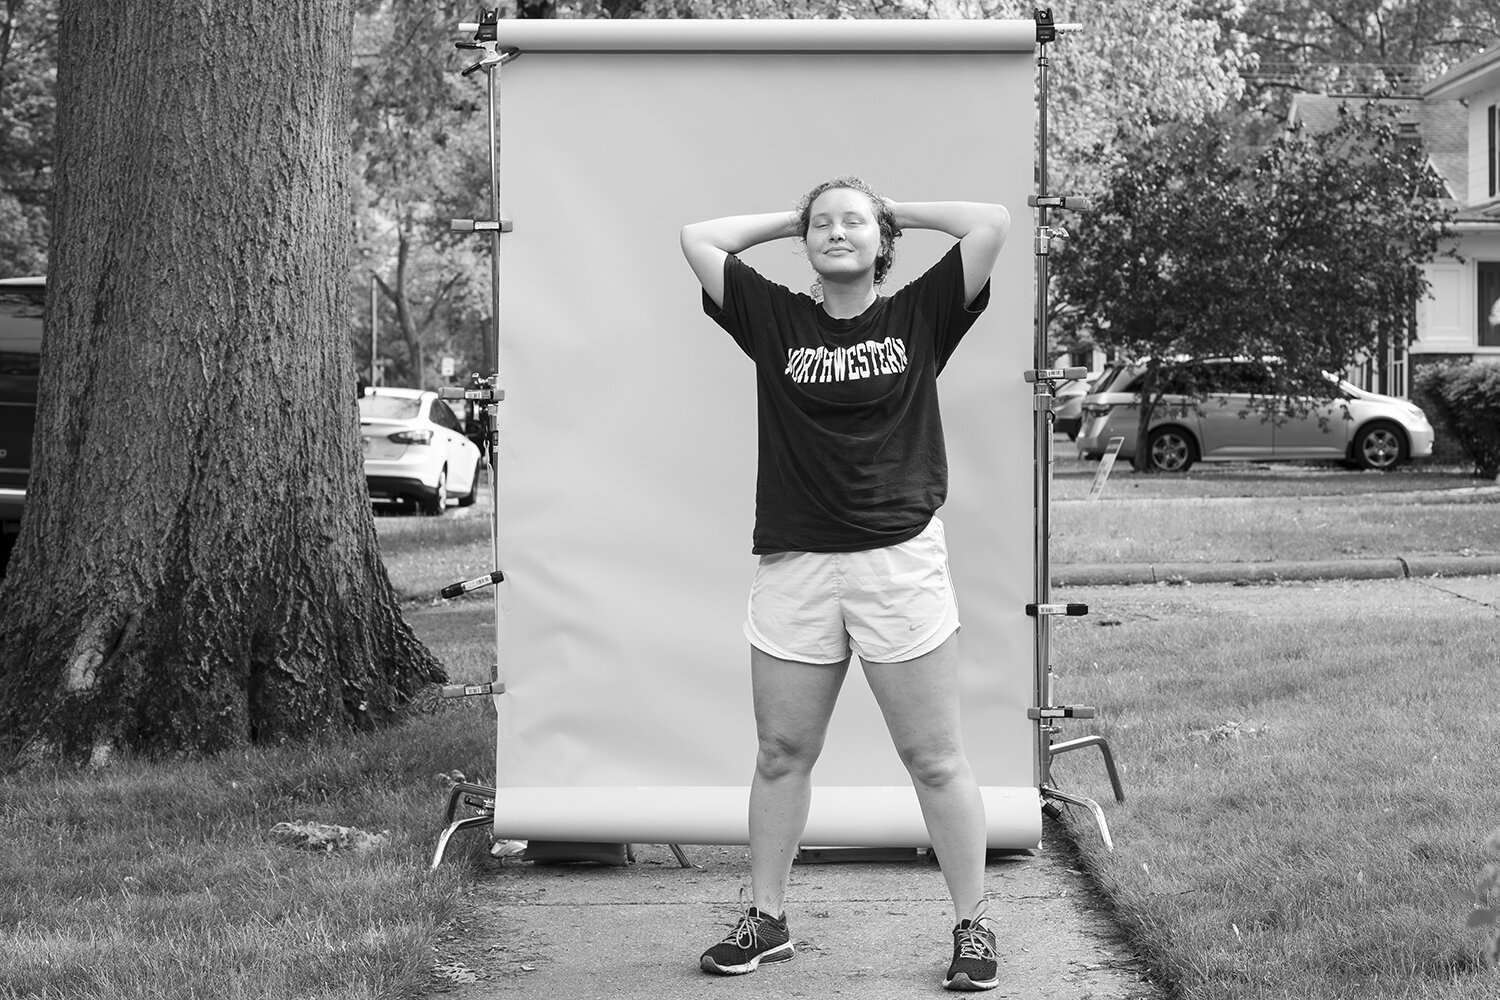  "It's been kind of good to have an online chemistry lab because it's only one hour a week. On campus it would have been four hours.”— Allison Teichman, cooling down after a run in Washington Park. 